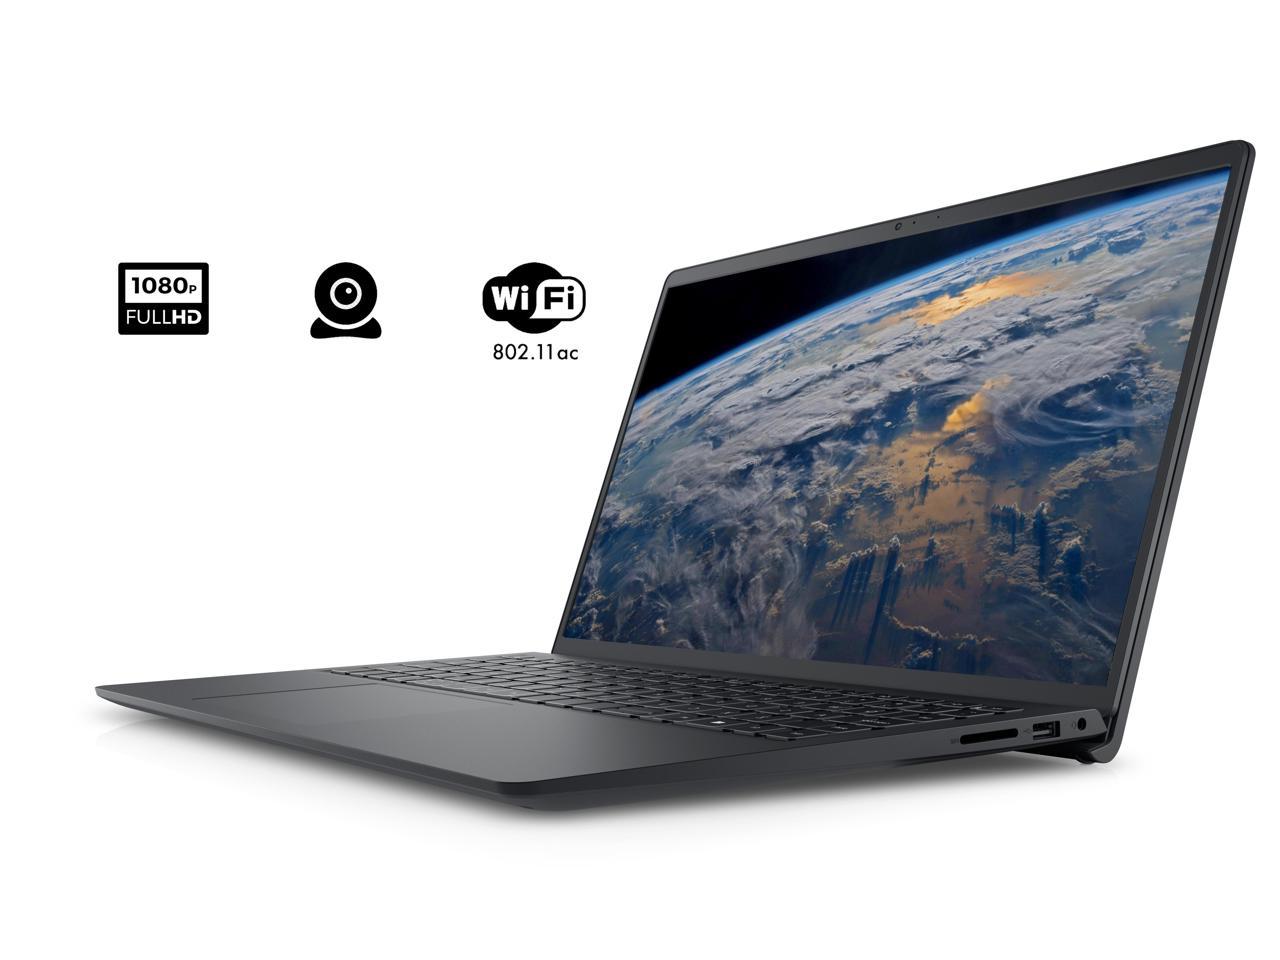 2022 Newest Dell Inspiron 15 3511 Laptop, 15.6" FHD Touchscreen, Intel